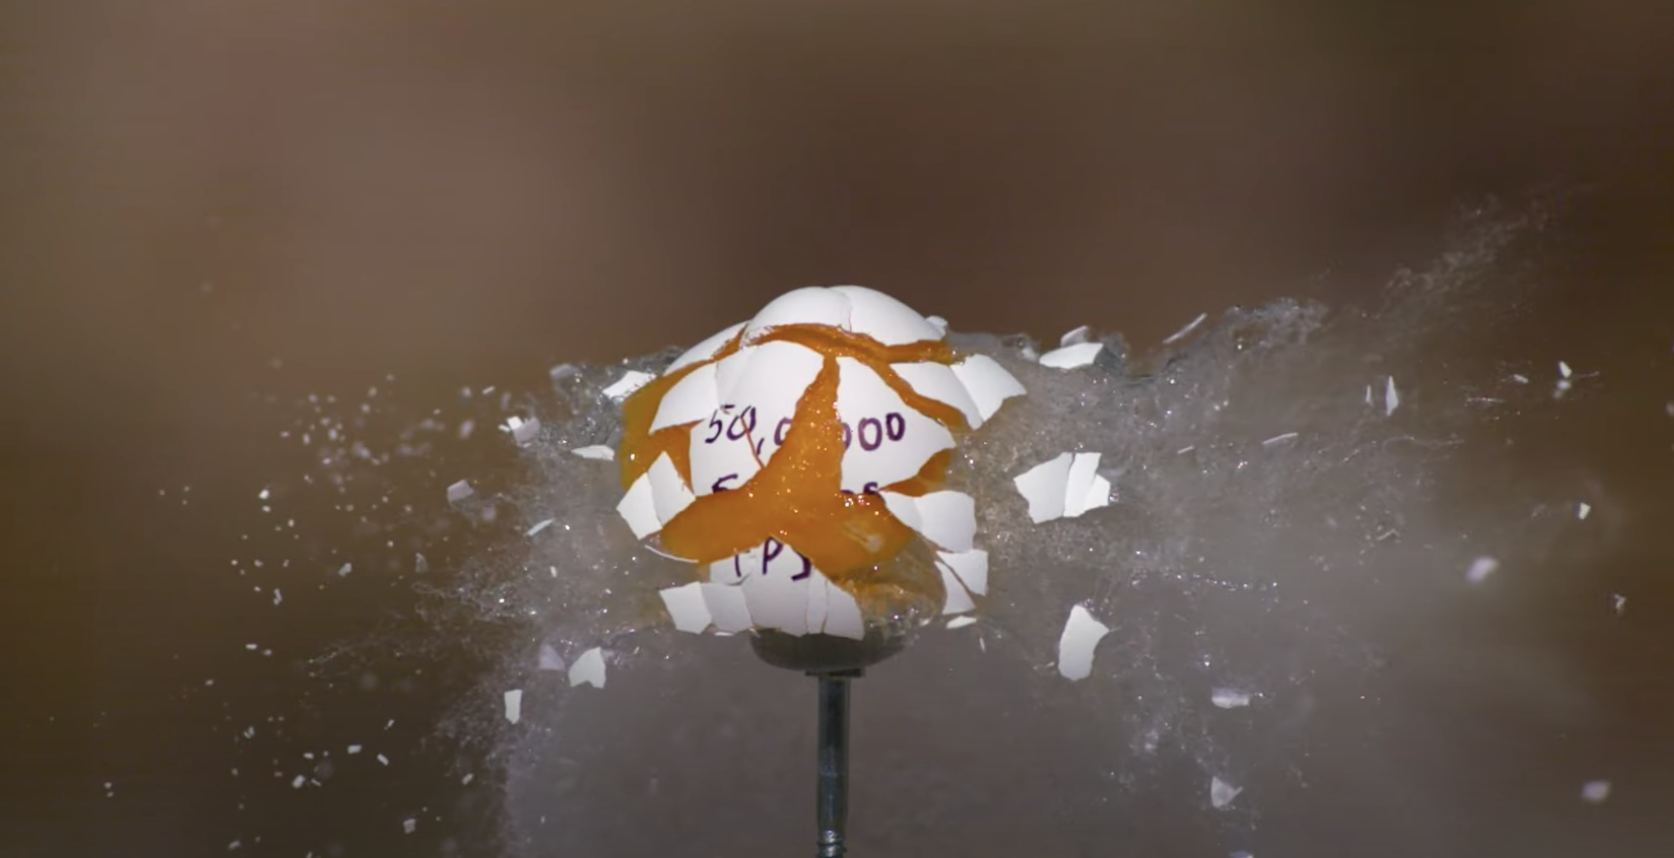 An egg exploding in slow motion, with shell rippling through the air.